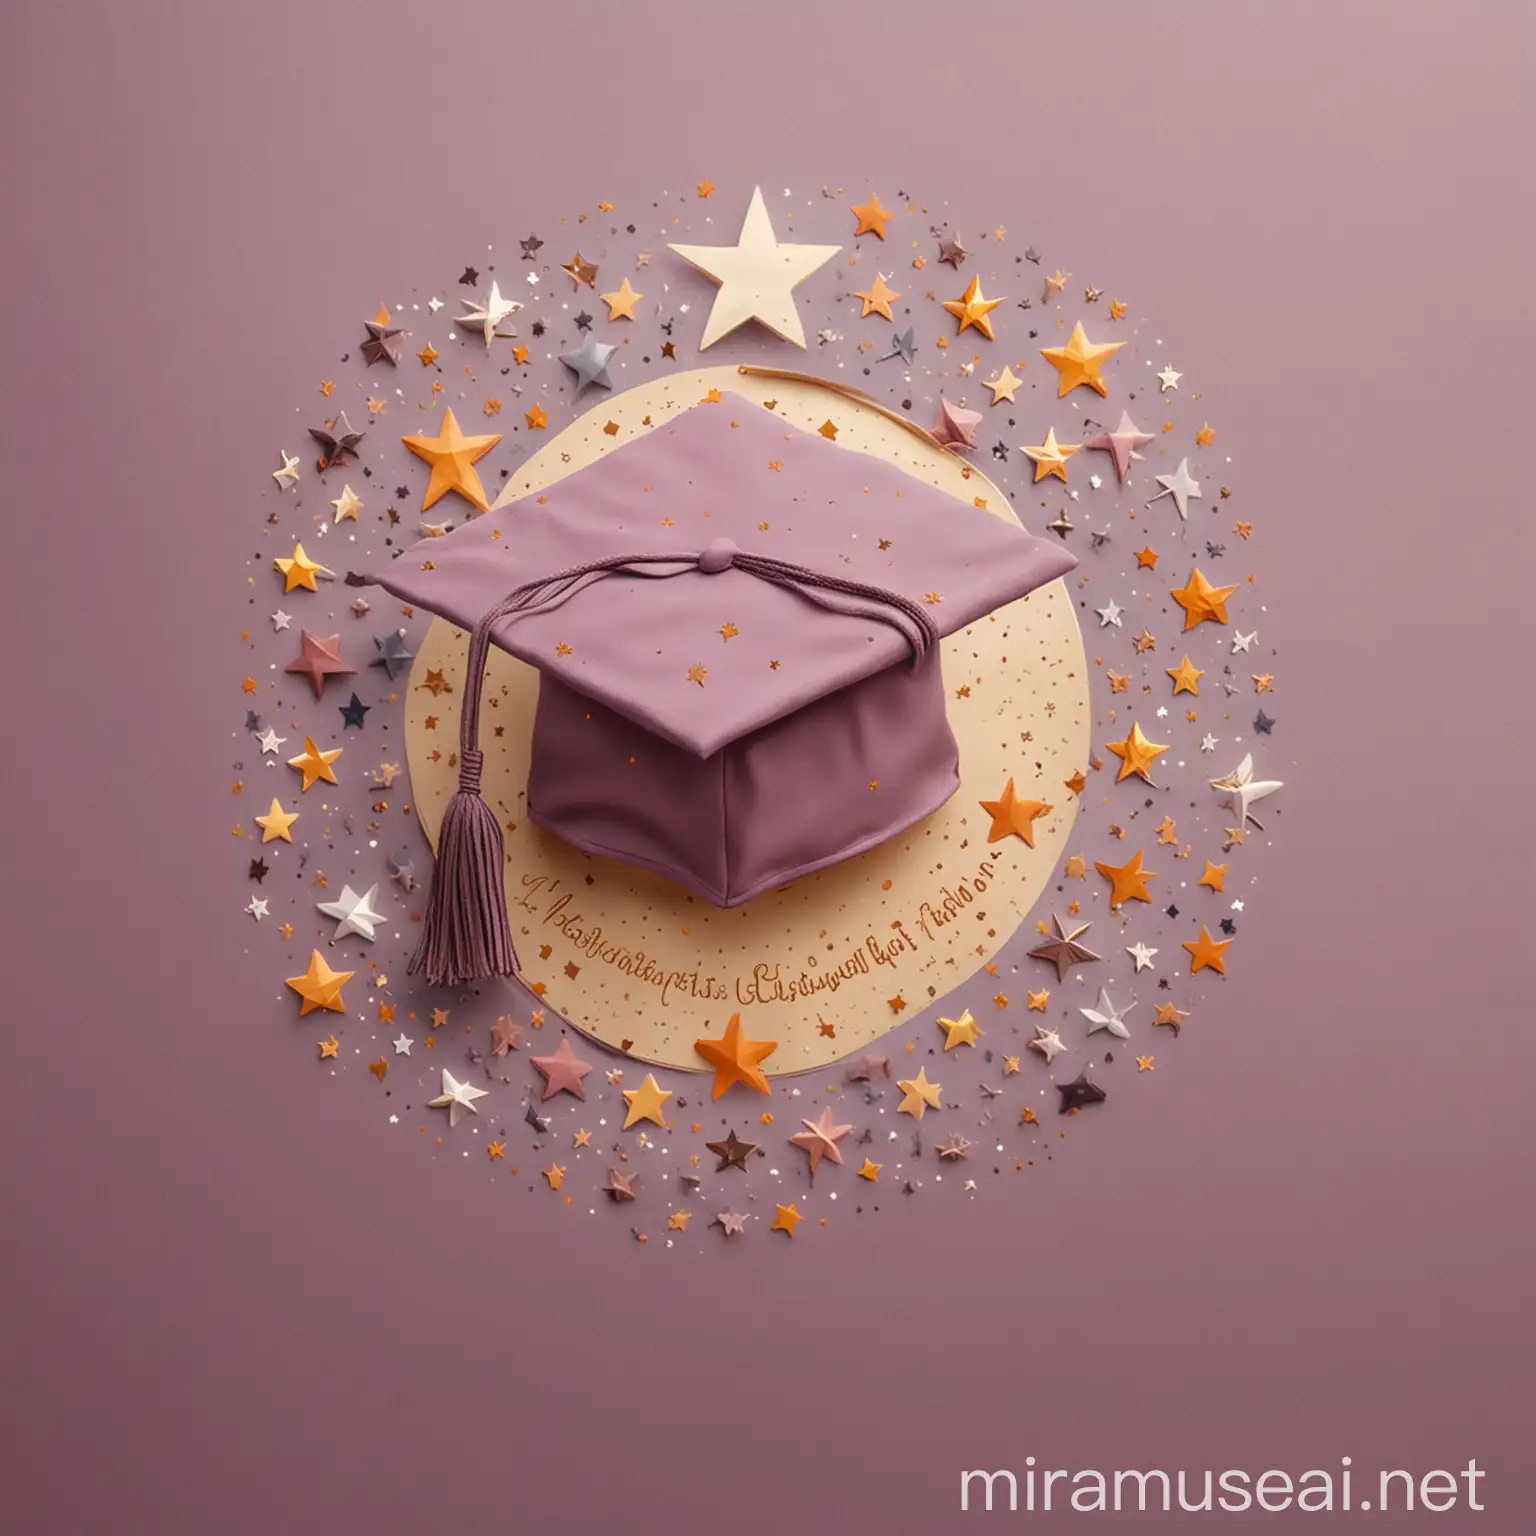 school scrst
Things I will love to see in the logo: the graduating cap in a mauve colour with stars surrounding it( stars in gold)
Colour for the school orange and grey